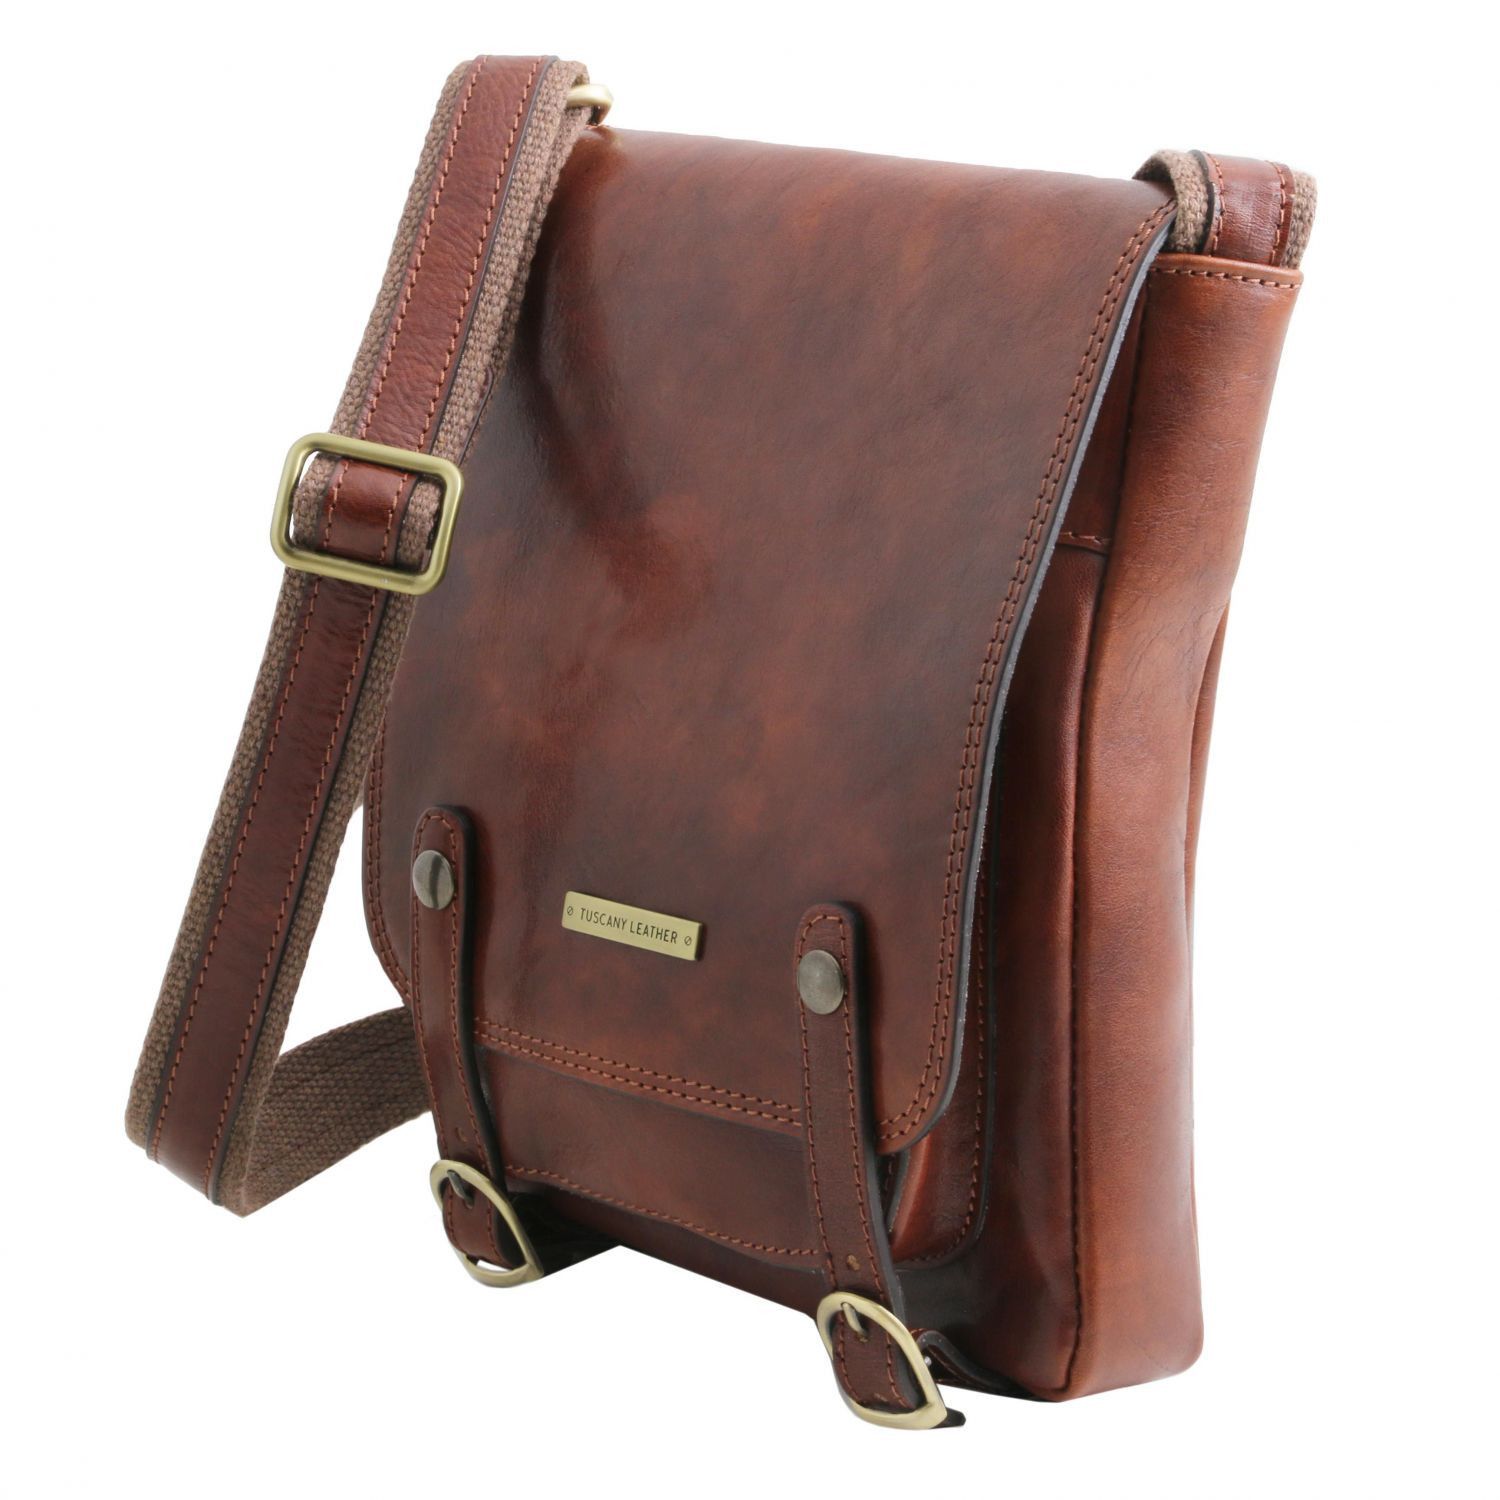 Leather Crossbody Bag for Men with Front Straps - Roby - Domini Leather